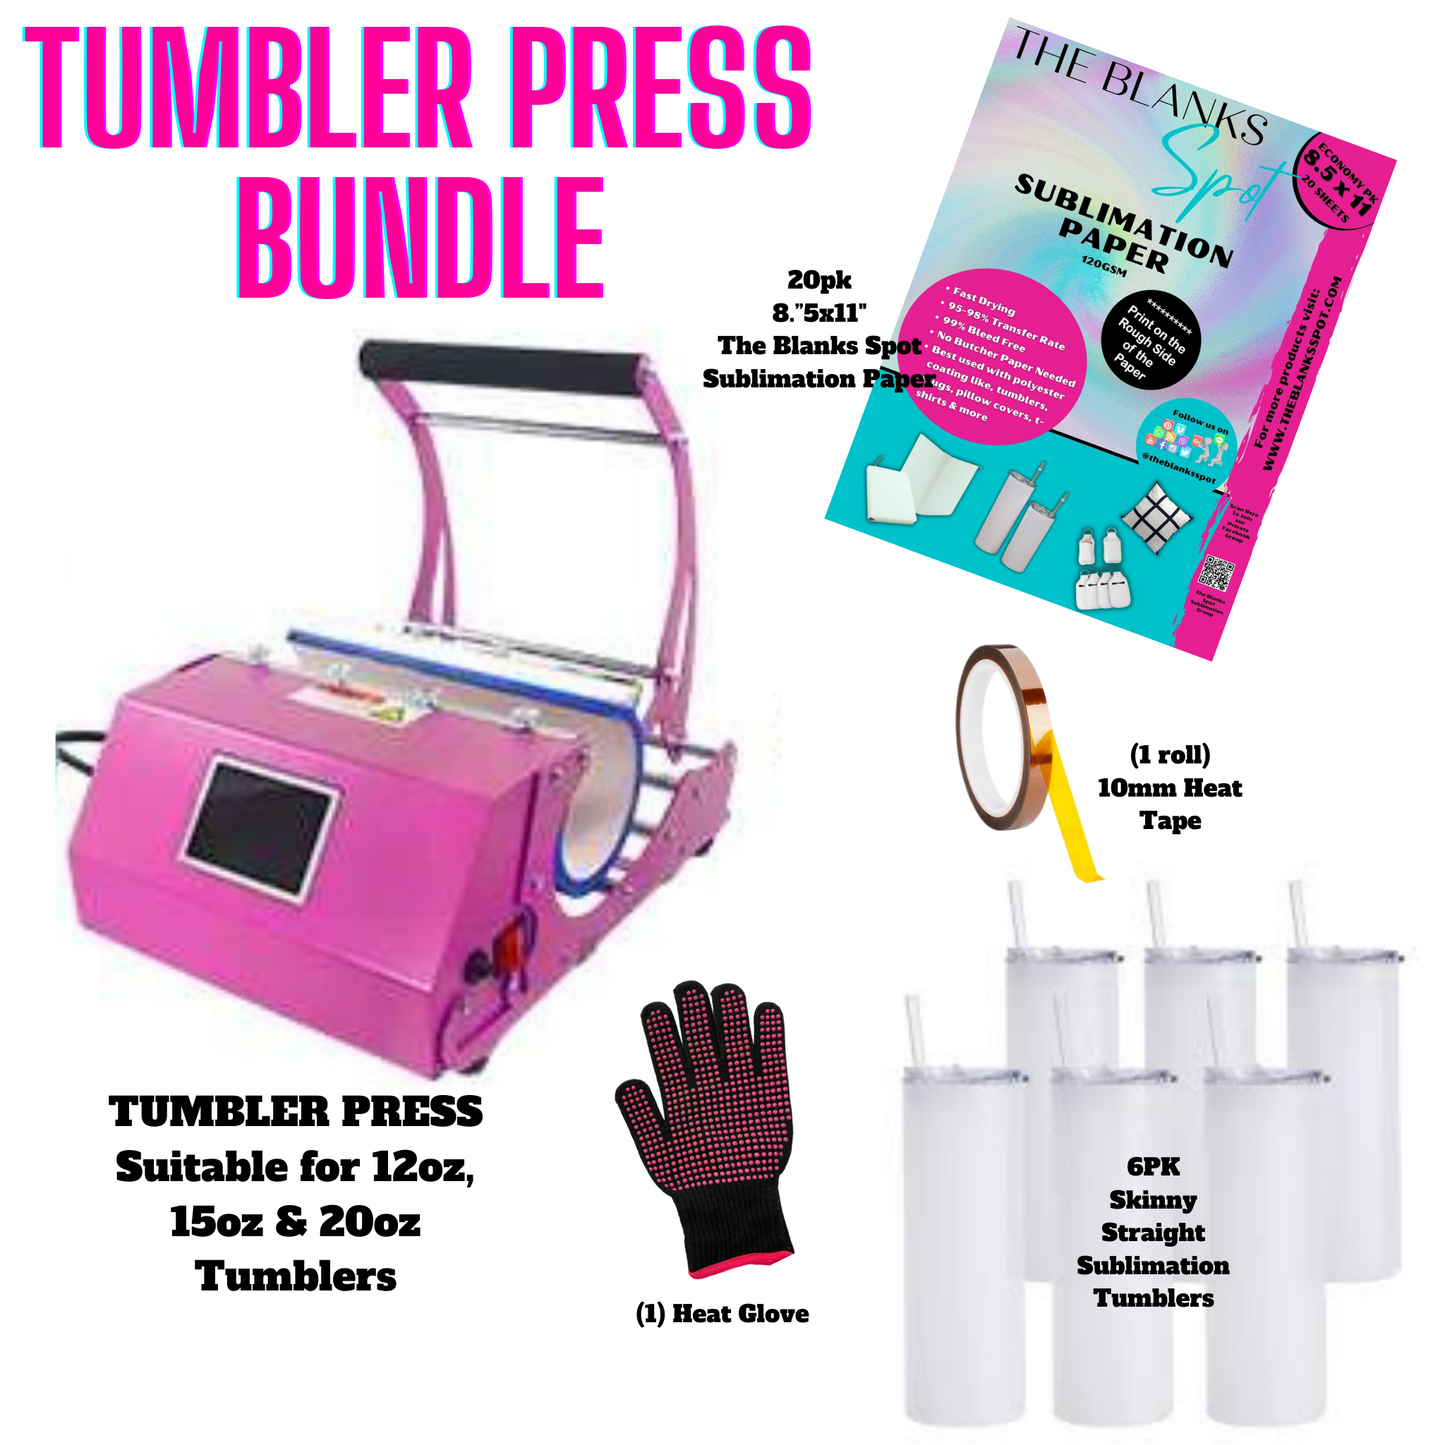 Tumbler Press BUNDLE (IF SHIPPING, MUST PURCHASE SEPARATE FROM OTHER ITEMS)